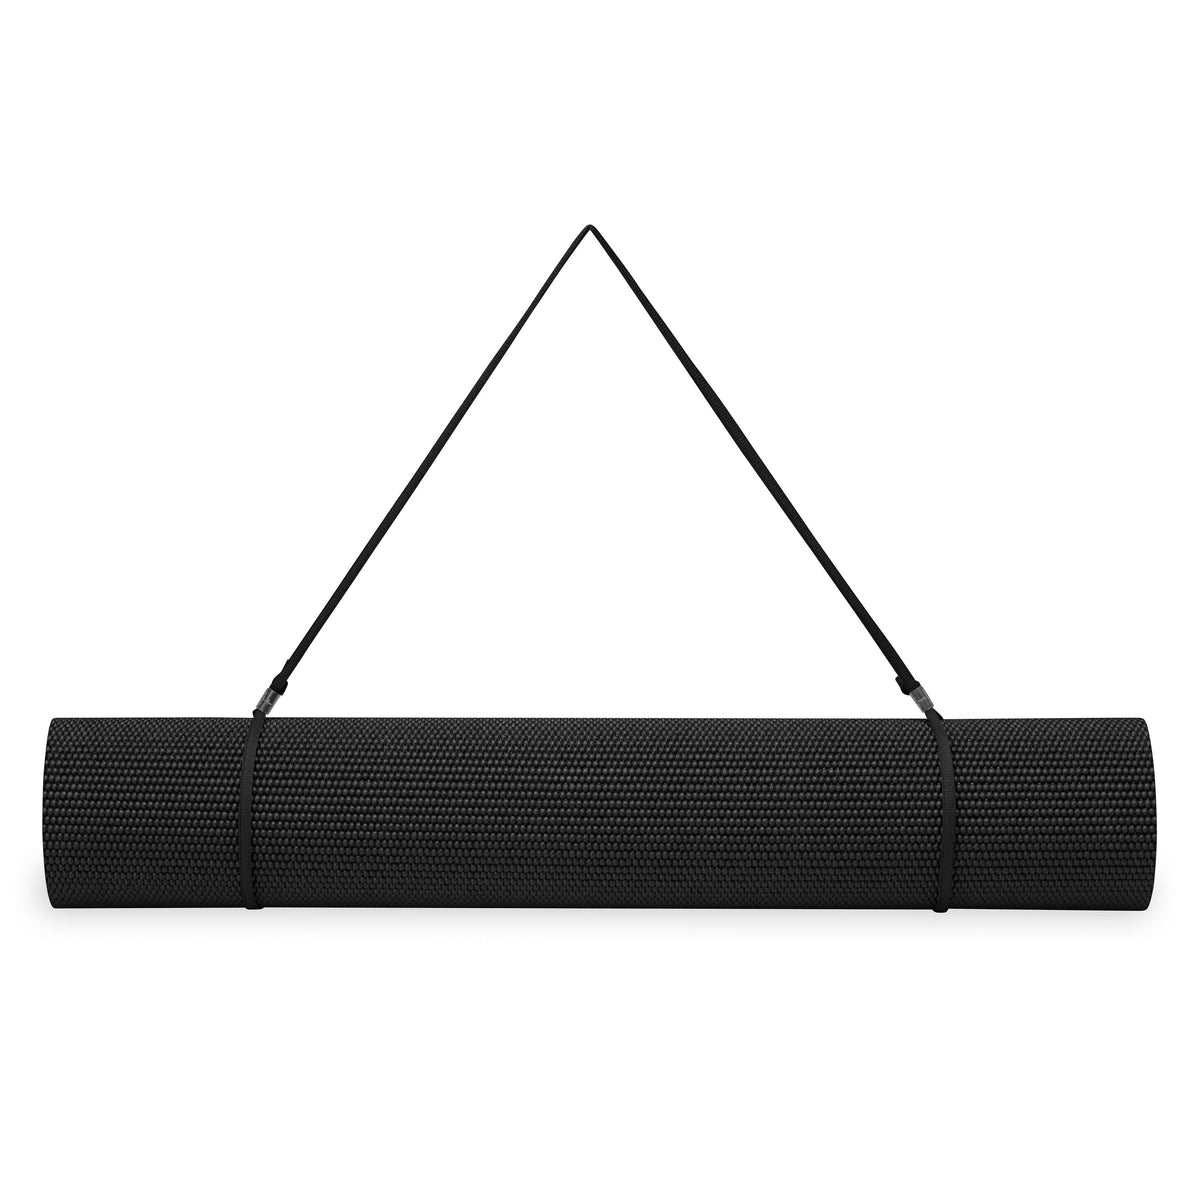 Reebok Solid Yoga Mat (5mm) Black rolled up with sling